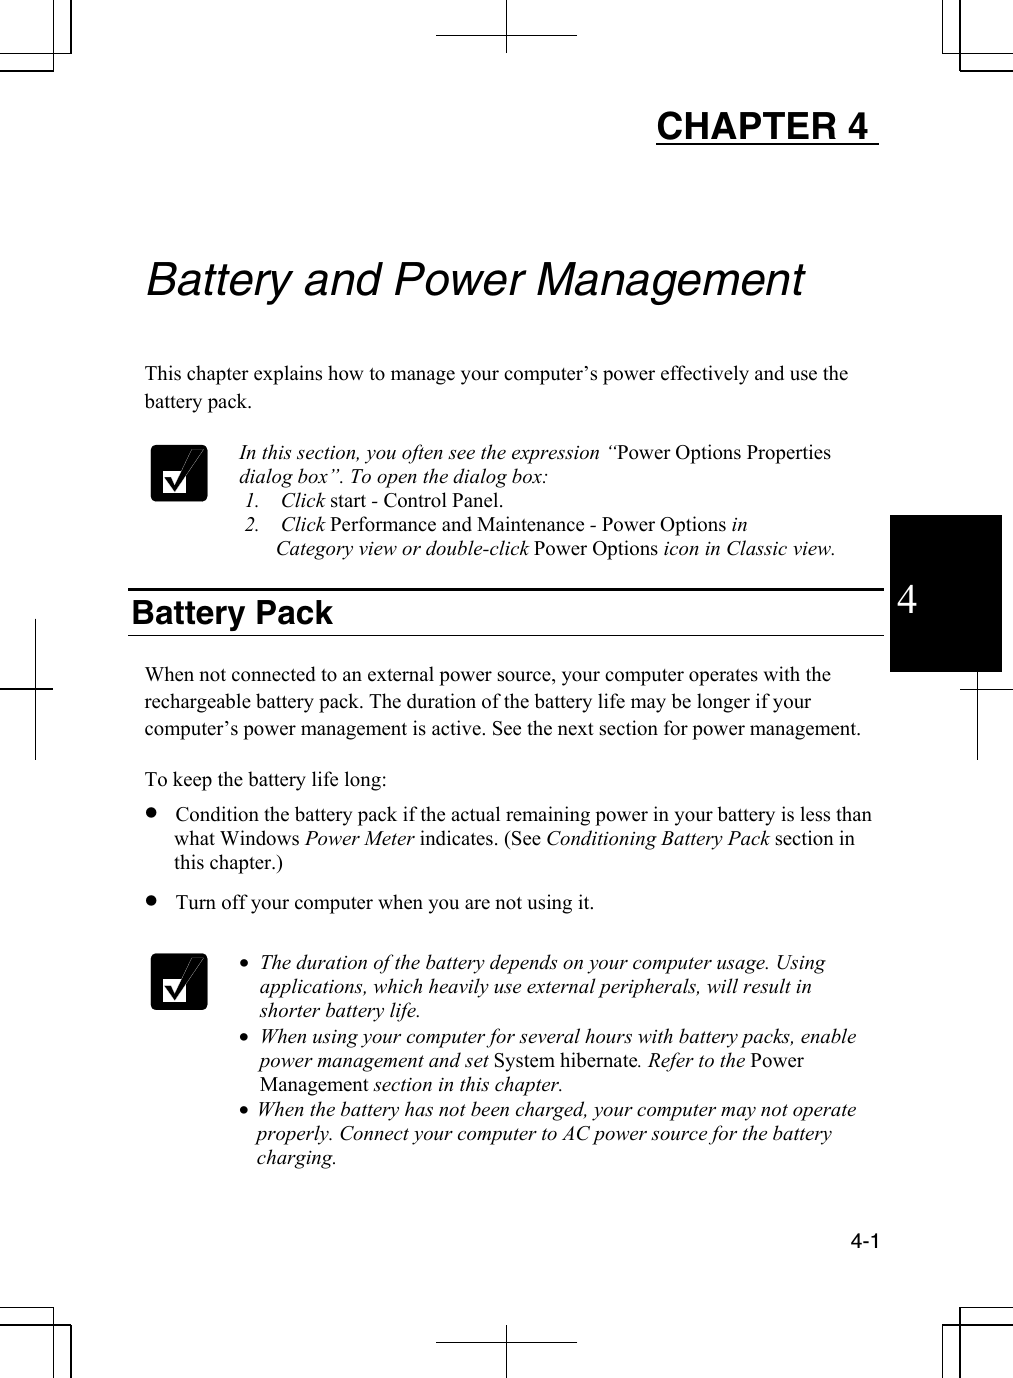  4-1  4 CHAPTER 4     Battery and Power Management  This chapter explains how to manage your computer’s power effectively and use the battery pack.   In this section, you often see the expression “Power Options Properties dialog box”. To open the dialog box:        1.    Click start - Control Panel.  2.    Click Performance and Maintenance - Power Options in             Category view or double-click Power Options icon in Classic view.        Battery Pack  When not connected to an external power source, your computer operates with the rechargeable battery pack. The duration of the battery life may be longer if your computer’s power management is active. See the next section for power management.   To keep the battery life long:  •  Condition the battery pack if the actual remaining power in your battery is less than what Windows Power Meter indicates. (See Conditioning Battery Pack section in this chapter.) •  Turn off your computer when you are not using it.   •  The duration of the battery depends on your computer usage. Using applications, which heavily use external peripherals, will result in shorter battery life. •  When using your computer for several hours with battery packs, enable power management and set System hibernate. Refer to the Power Management section in this chapter. •  When the battery has not been charged, your computer may not operate properly. Connect your computer to AC power source for the battery charging. 